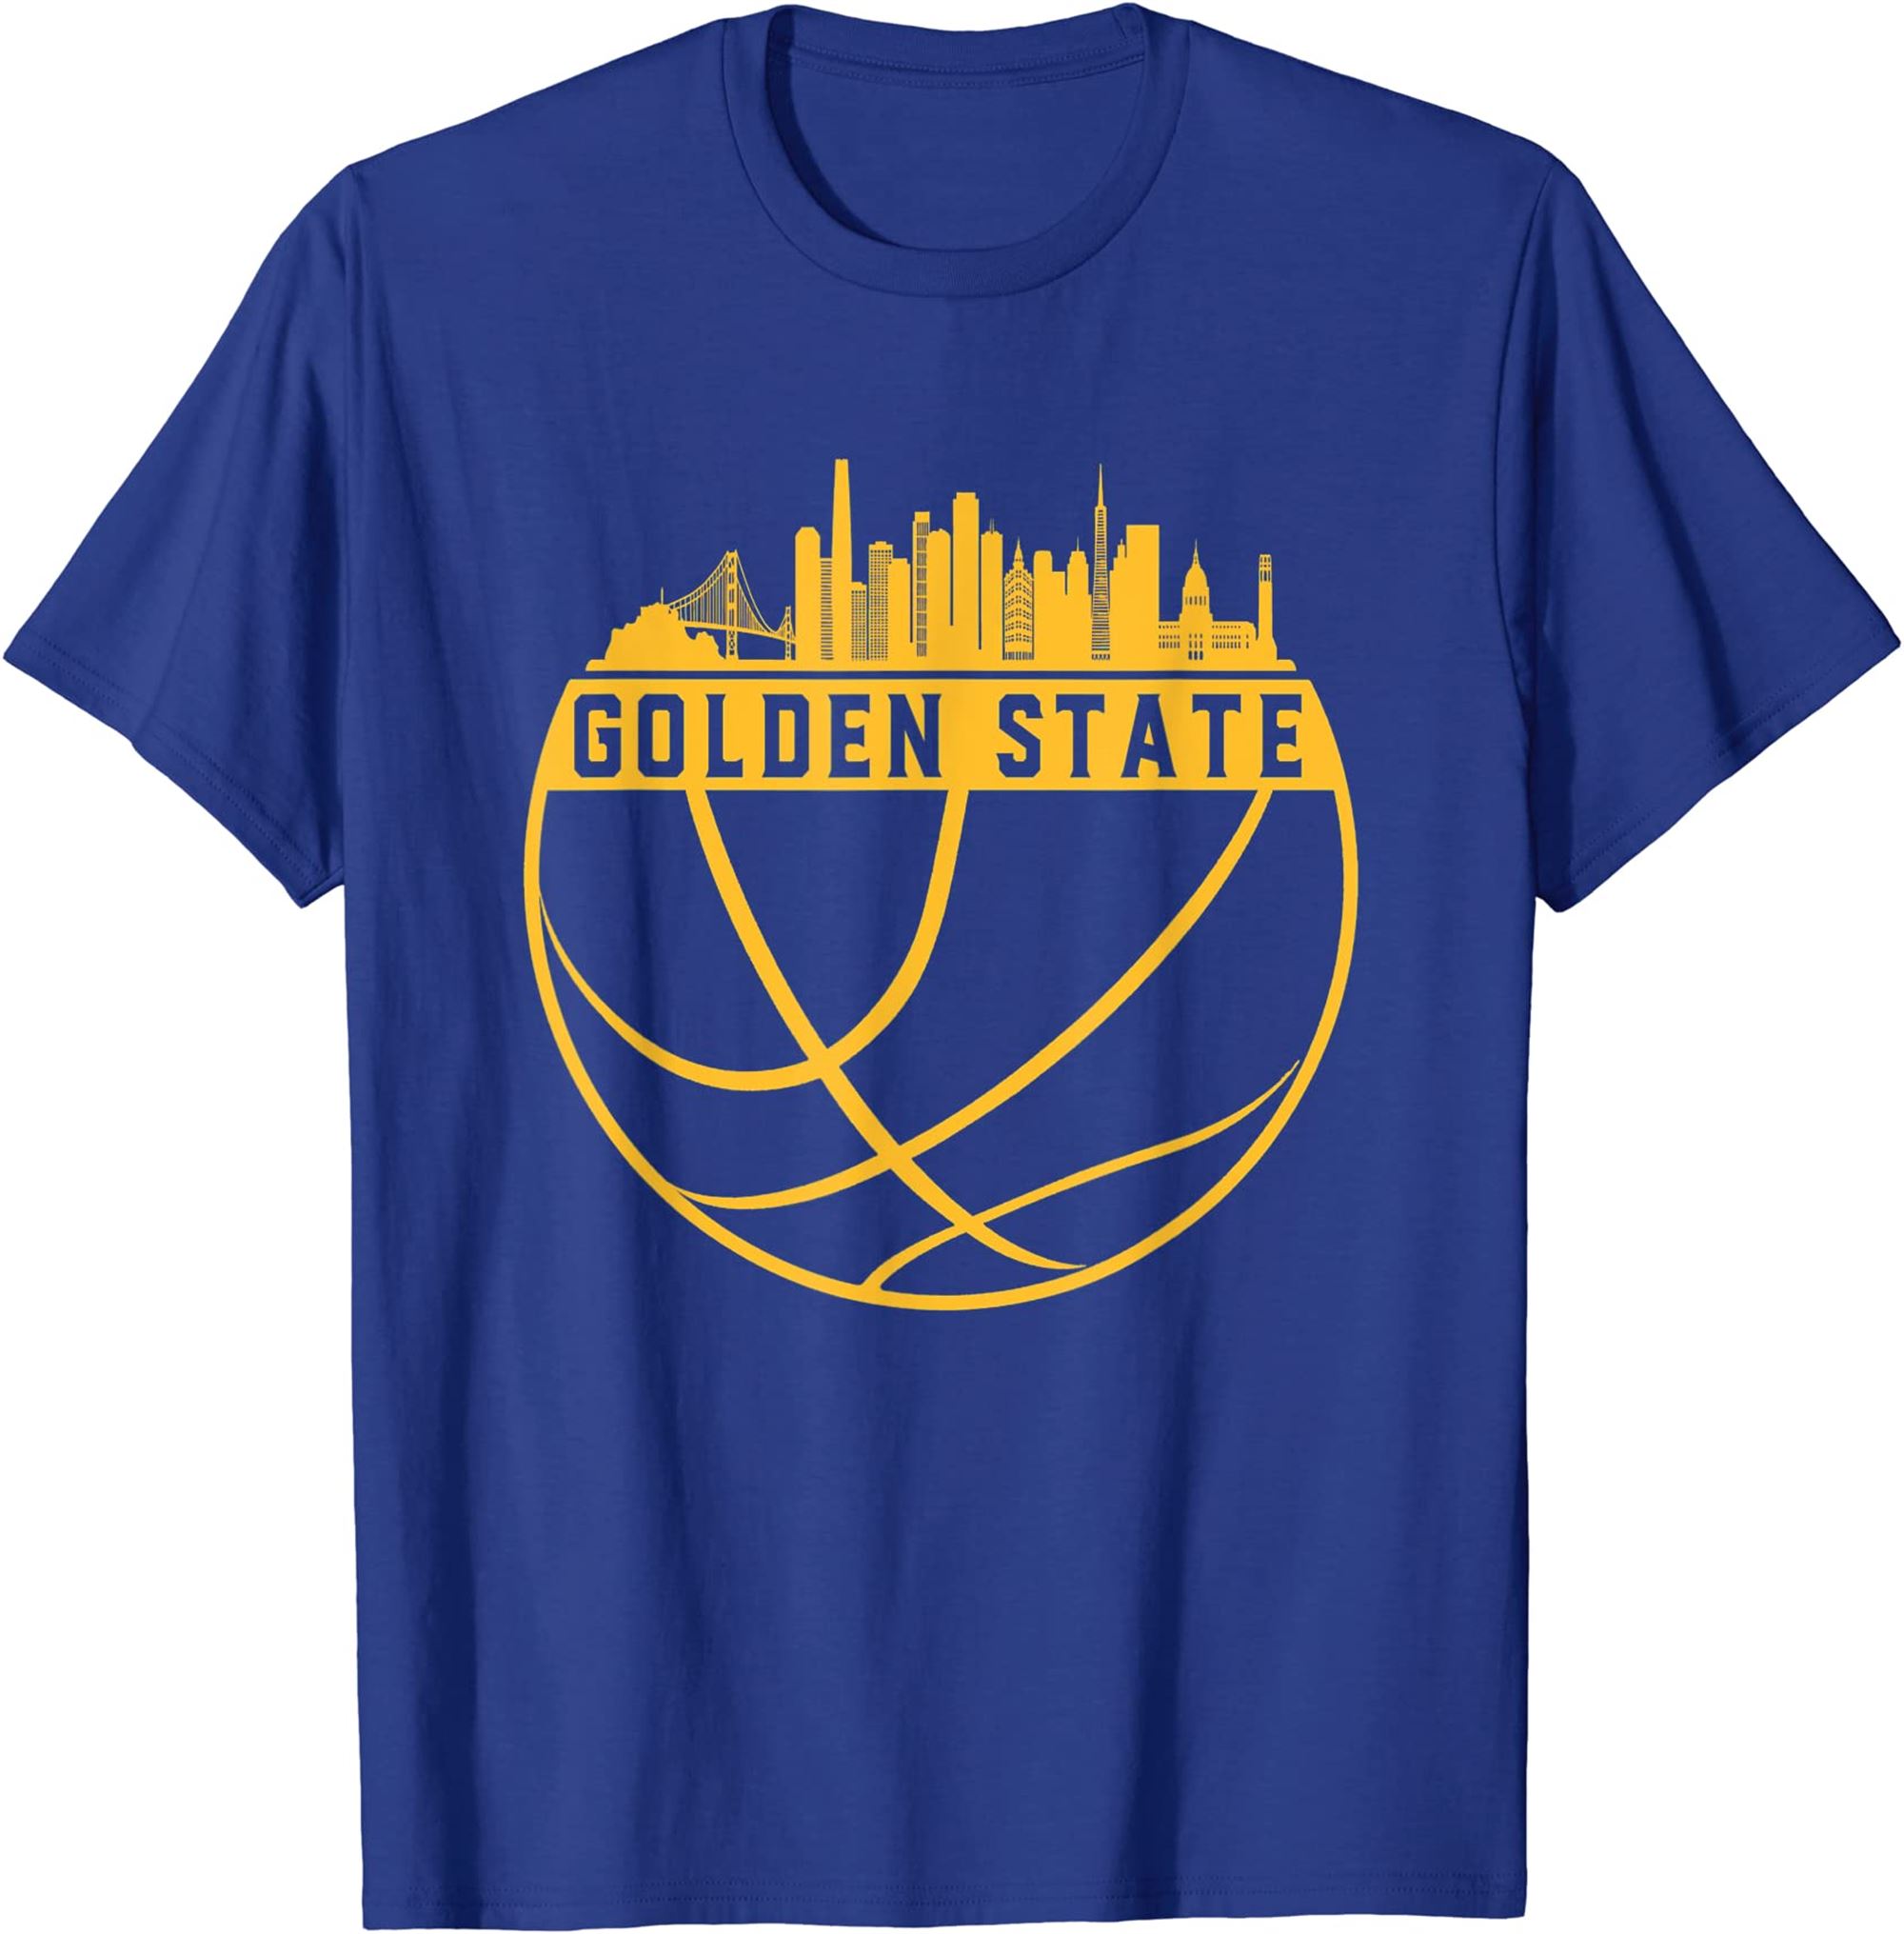 I Love Warriors City Oakland State California Team T-shirt Full Size Up To 5xl